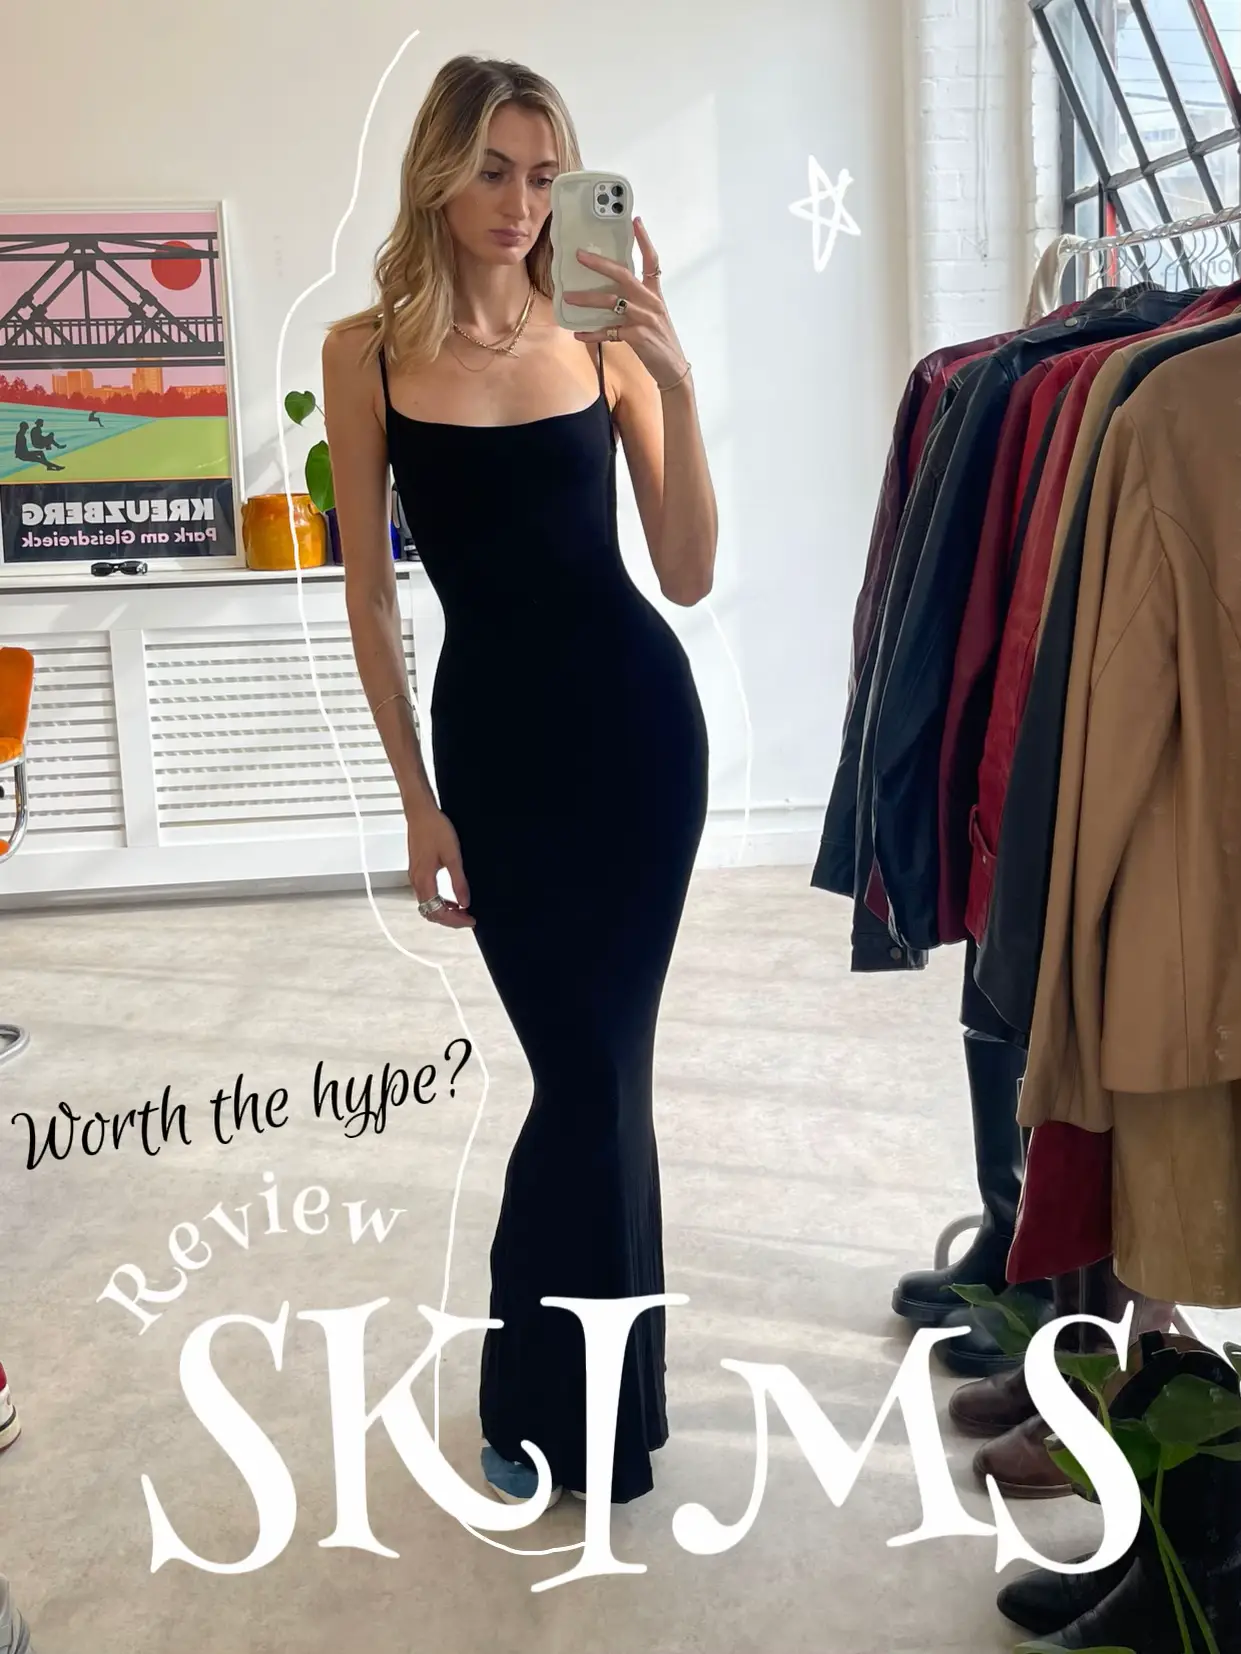 Shapely Bodysuit Reviews: Is It Worth the Hype?